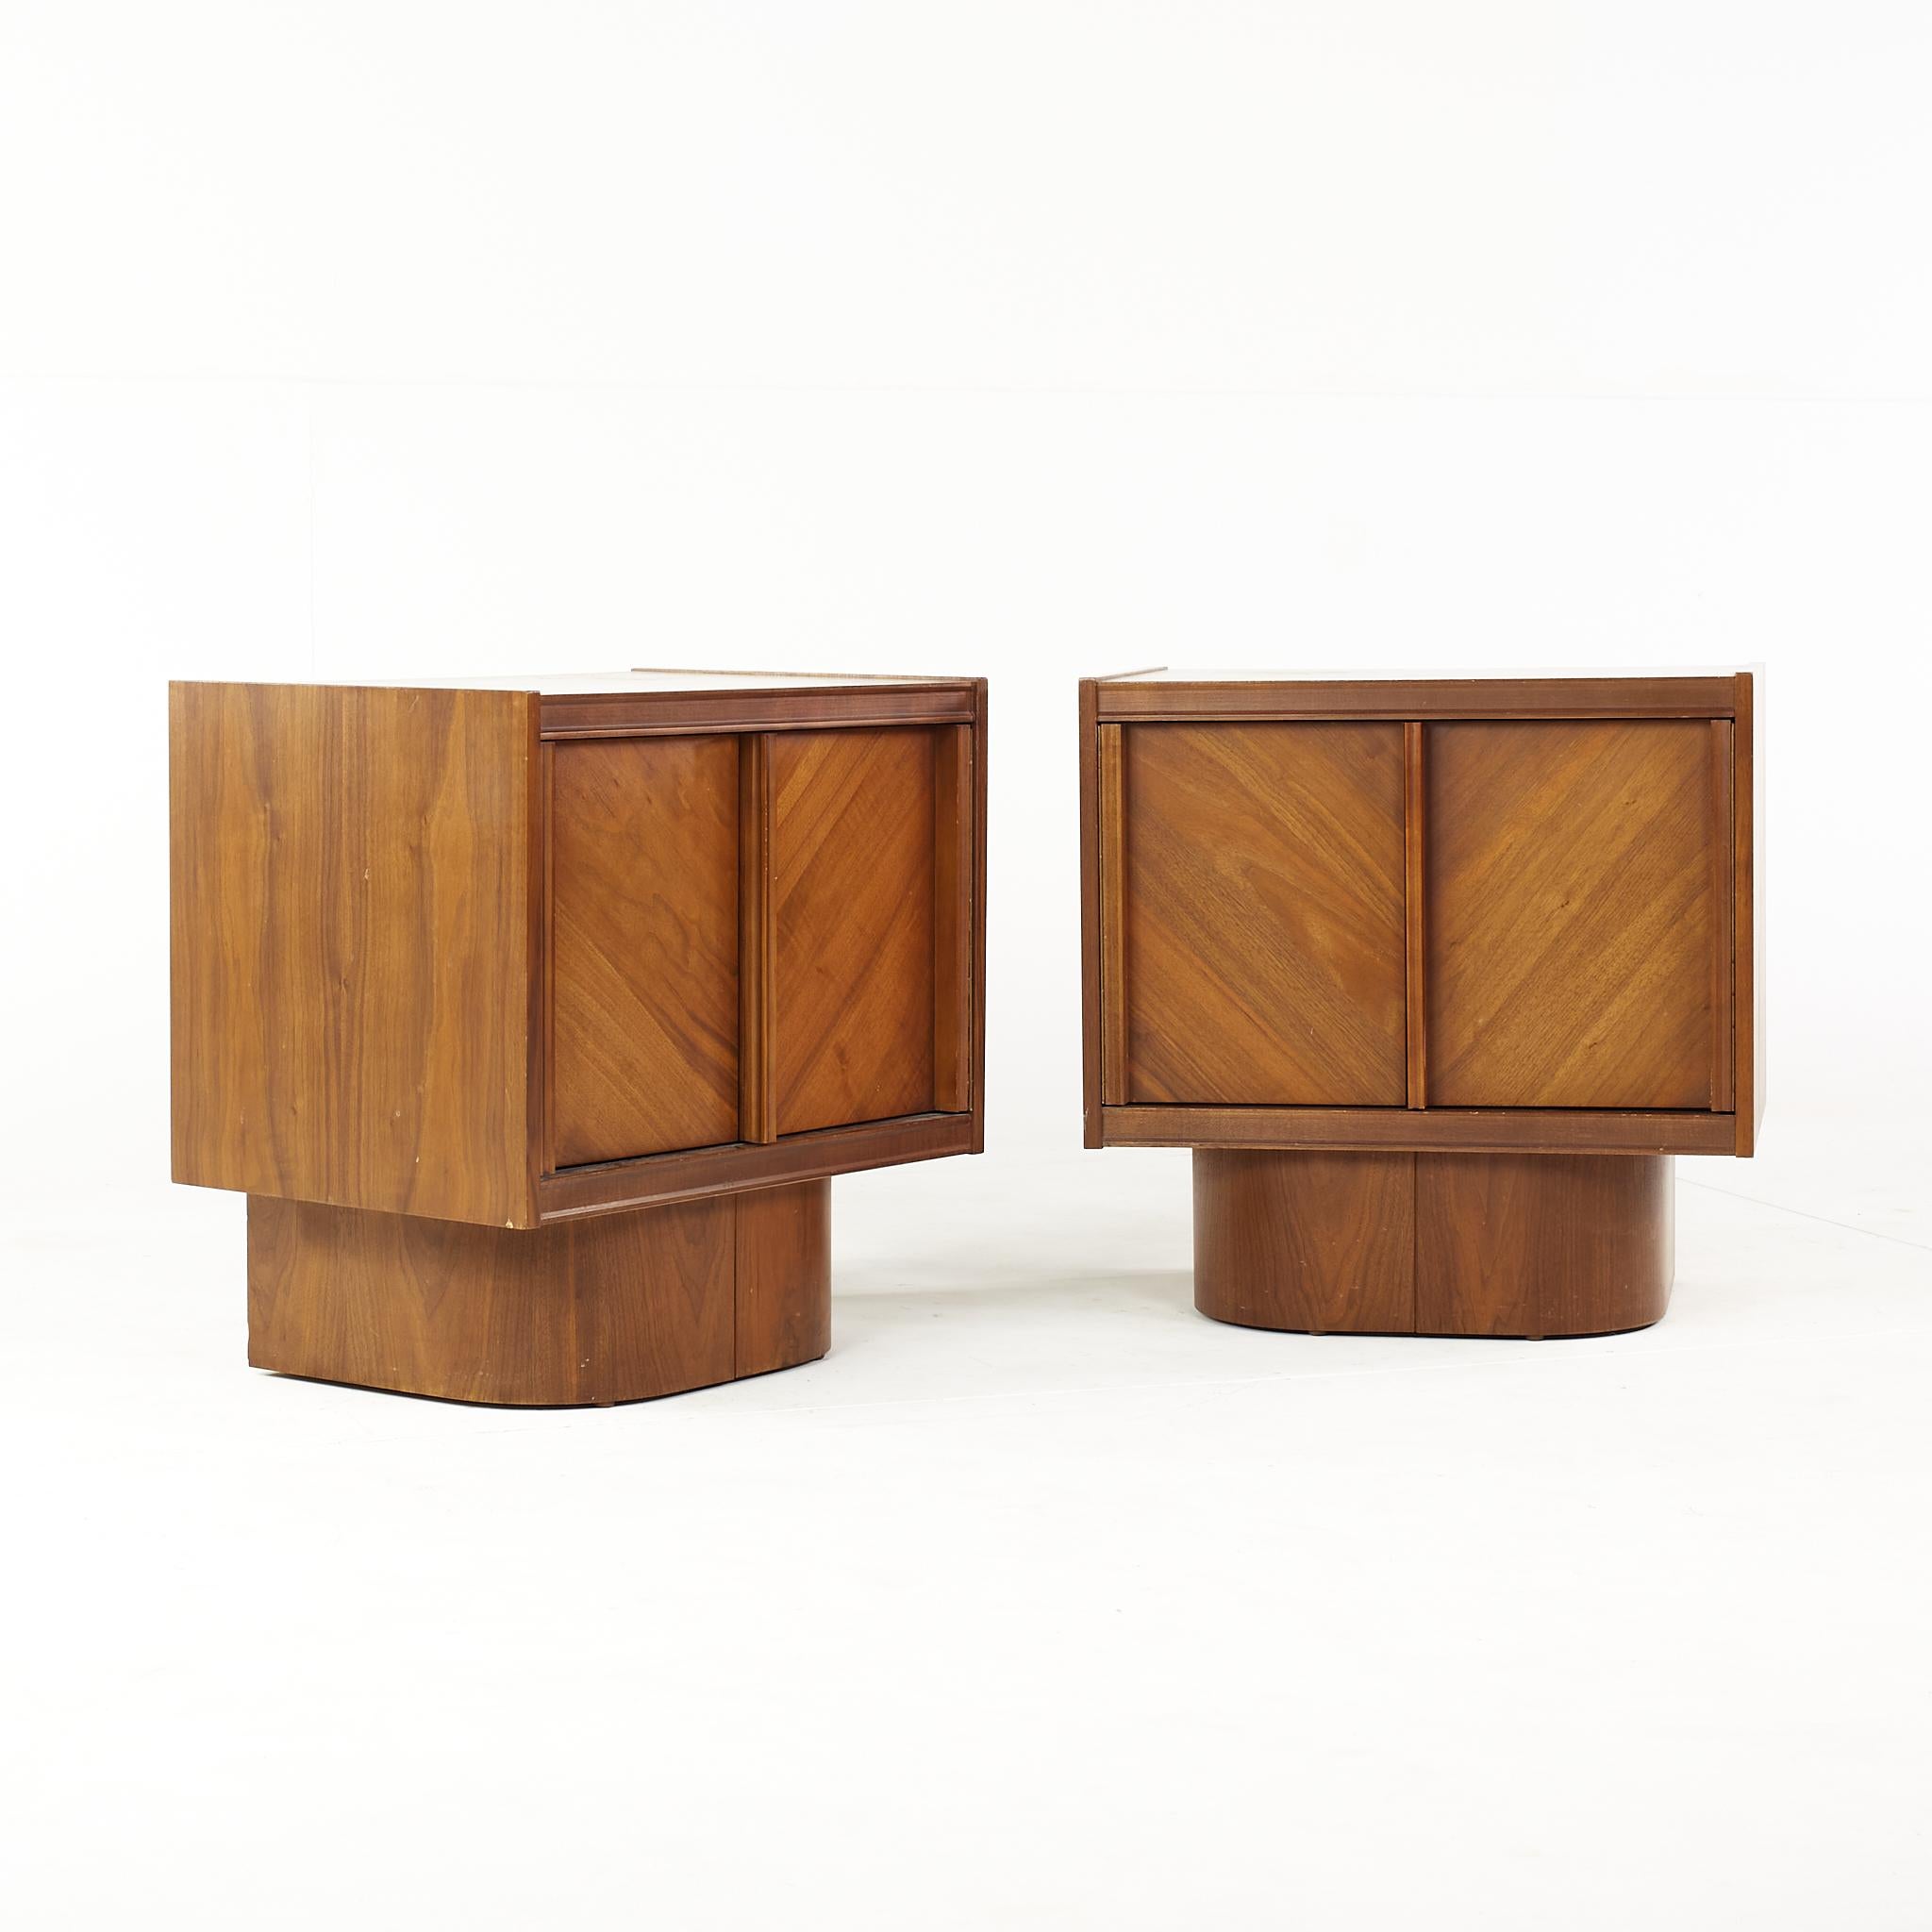 Canadian Brutalist mid century walnut nightstands - pair

This nightstand measures: 25 wide x 17 deep x 25 inches high

All pieces of furniture can be had in what we call restored vintage condition. That means the piece is restored upon purchase